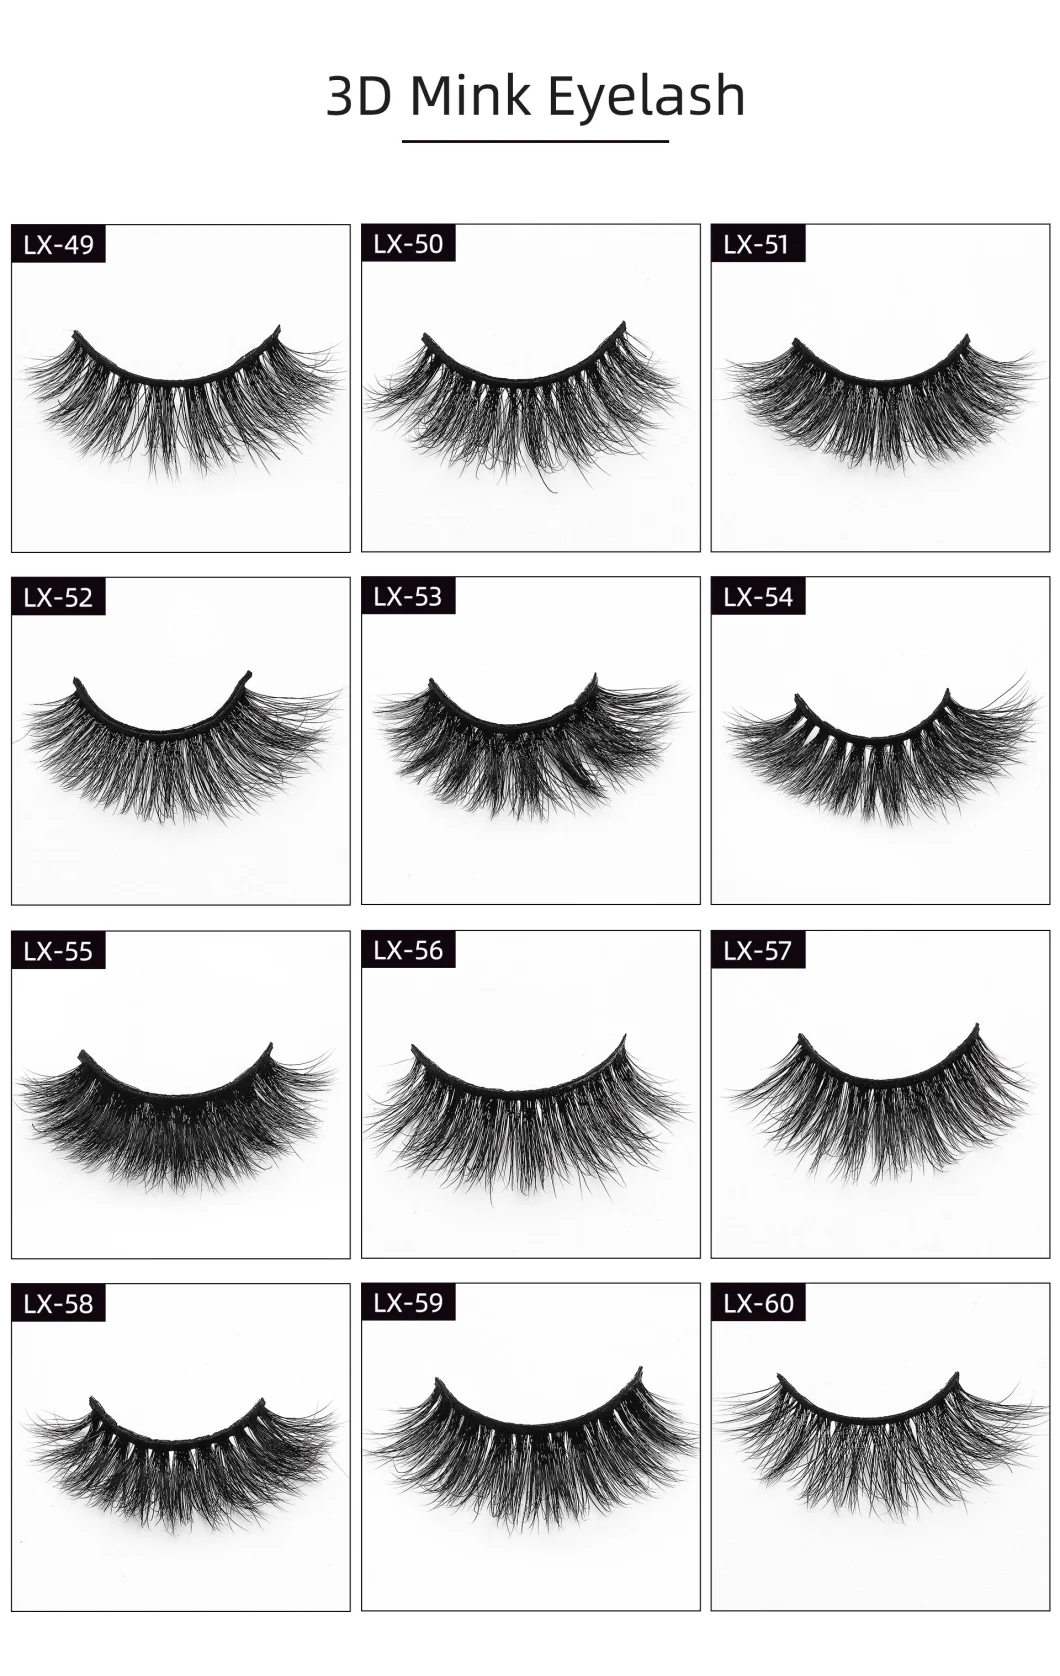 Factory Directly Supply Cruelty Free Eyelashes Mink 3D Lashes